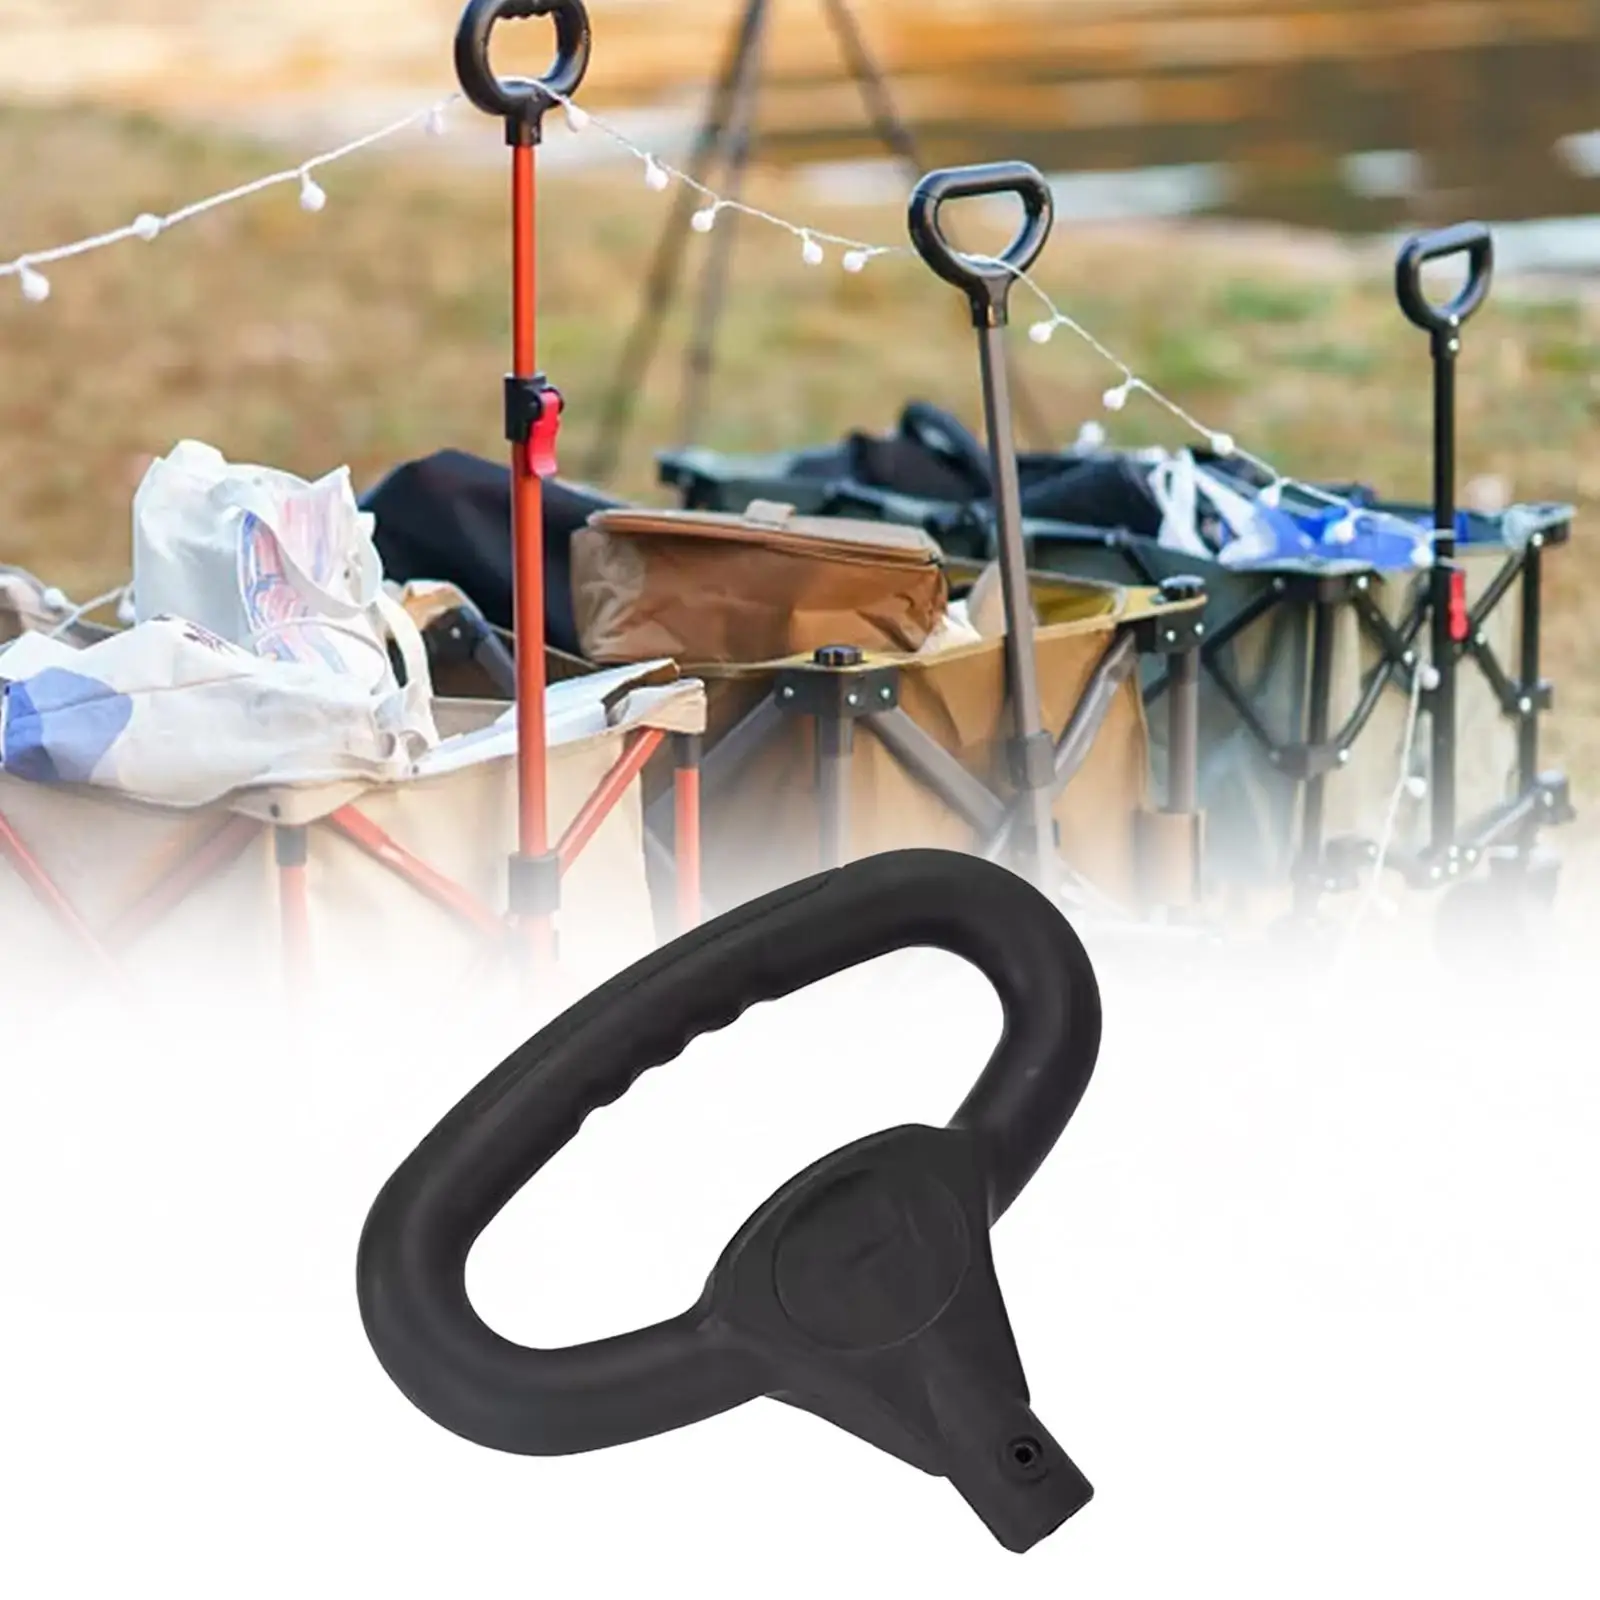 Wagon Cart Push Handle Replacement Accessories Comfortable Gripping Trolley Handle for Gardening Outdoor Beach Shopping Cart